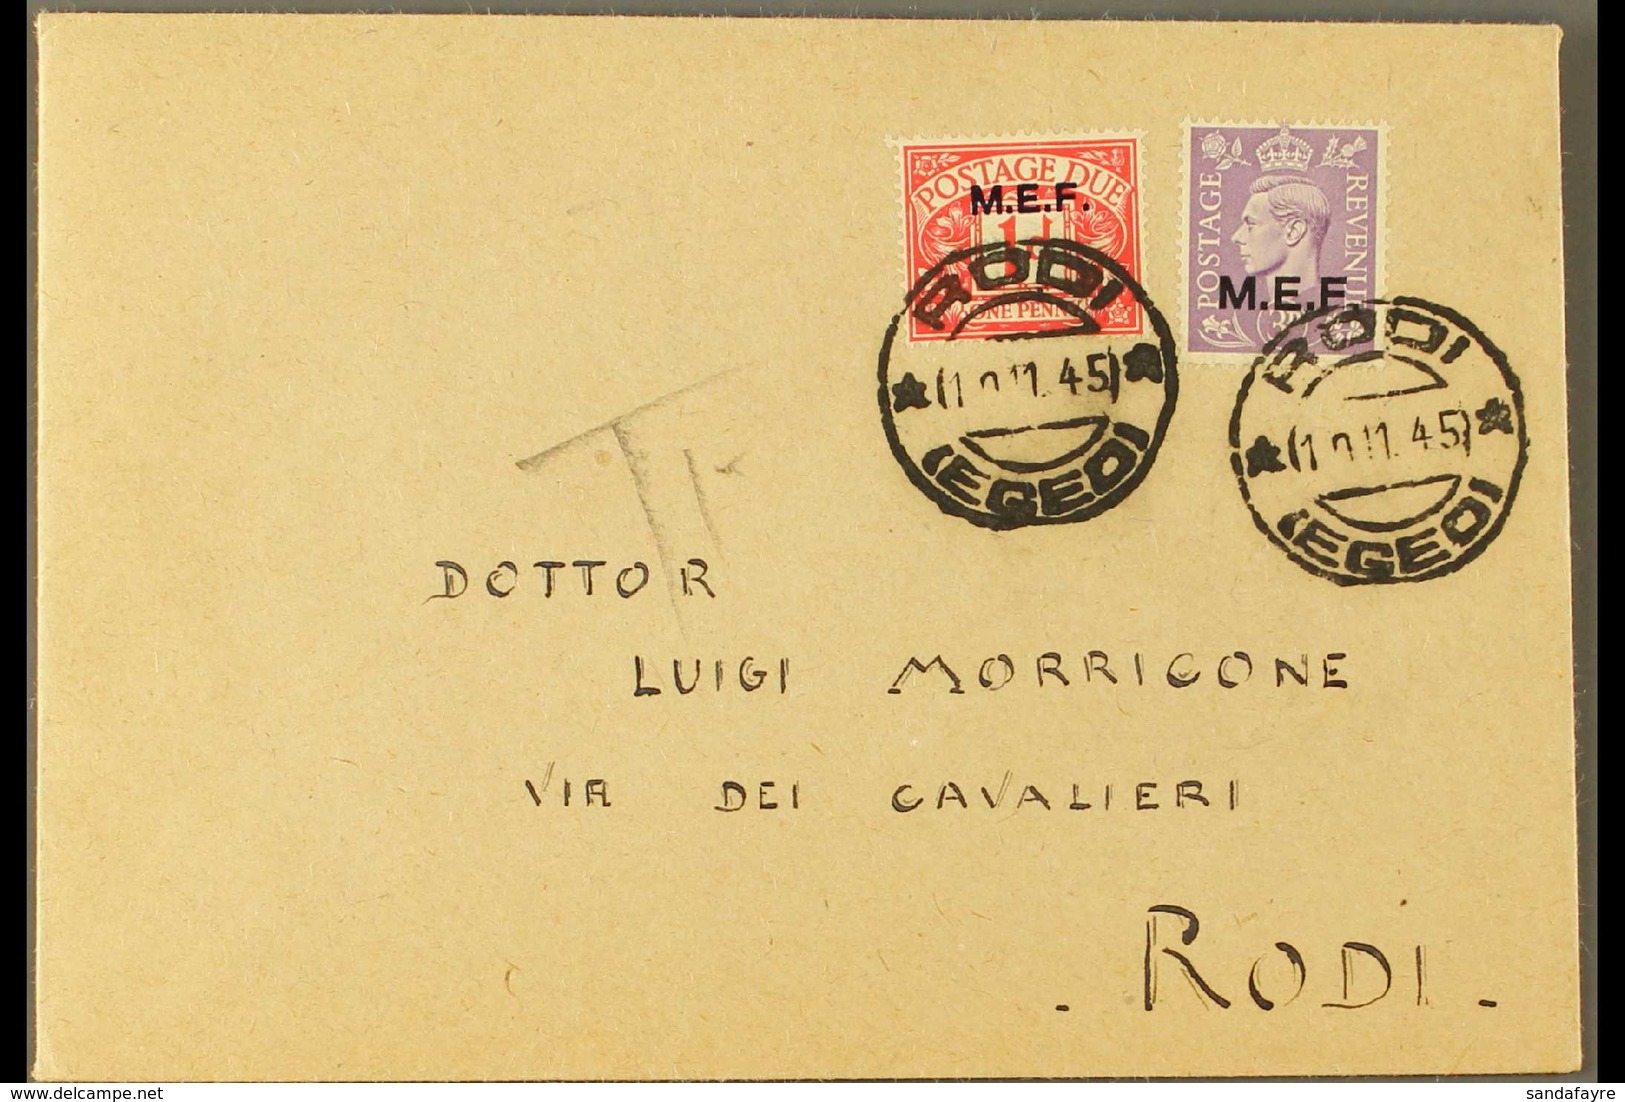 M.E.F. 1945, Two Attractive Envelopes, Each Bearing Postage Due 1d (one In Combination With Postage 3d), Tied Symi/Dodec - Africa Oriental Italiana